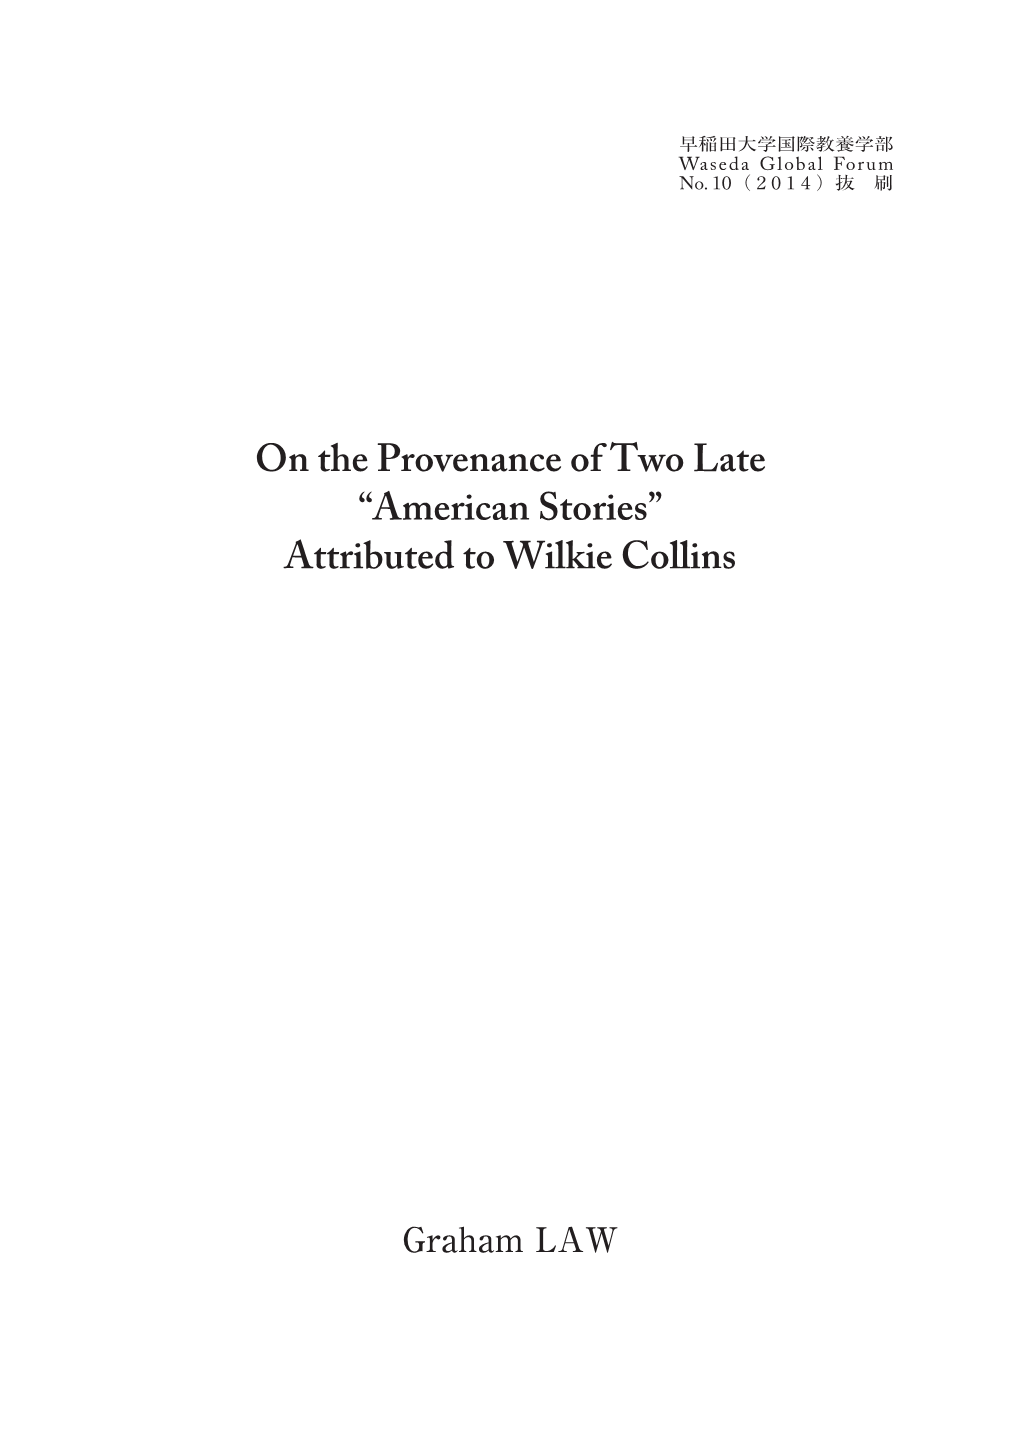 On the Provenance of Two Late “American Stories” Attributed to Wilkie Collins